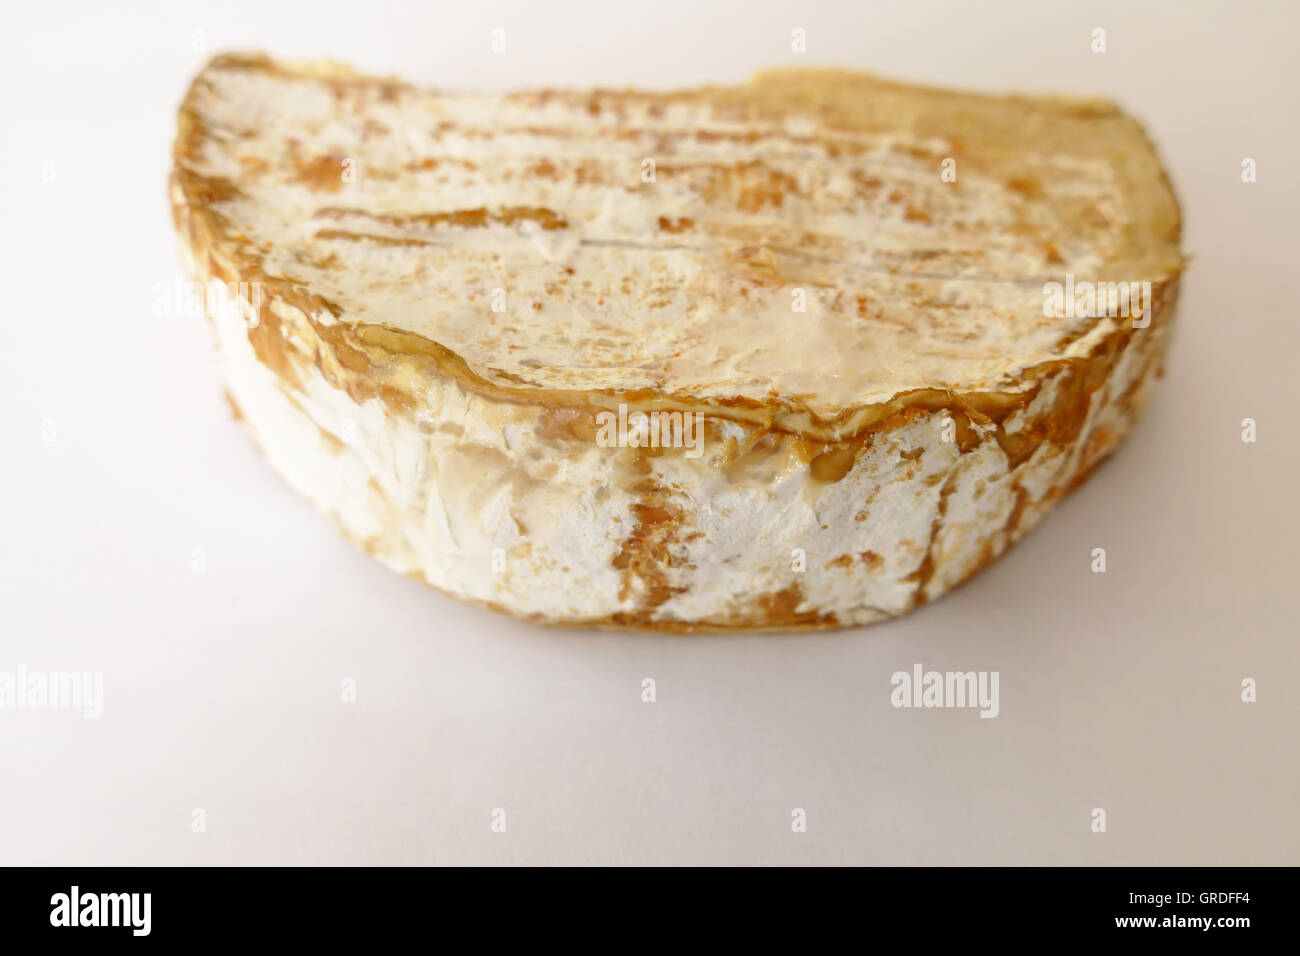 Overripe Soft Cheese, Slightly Scruffy, Isolated In White Background Stock Photo